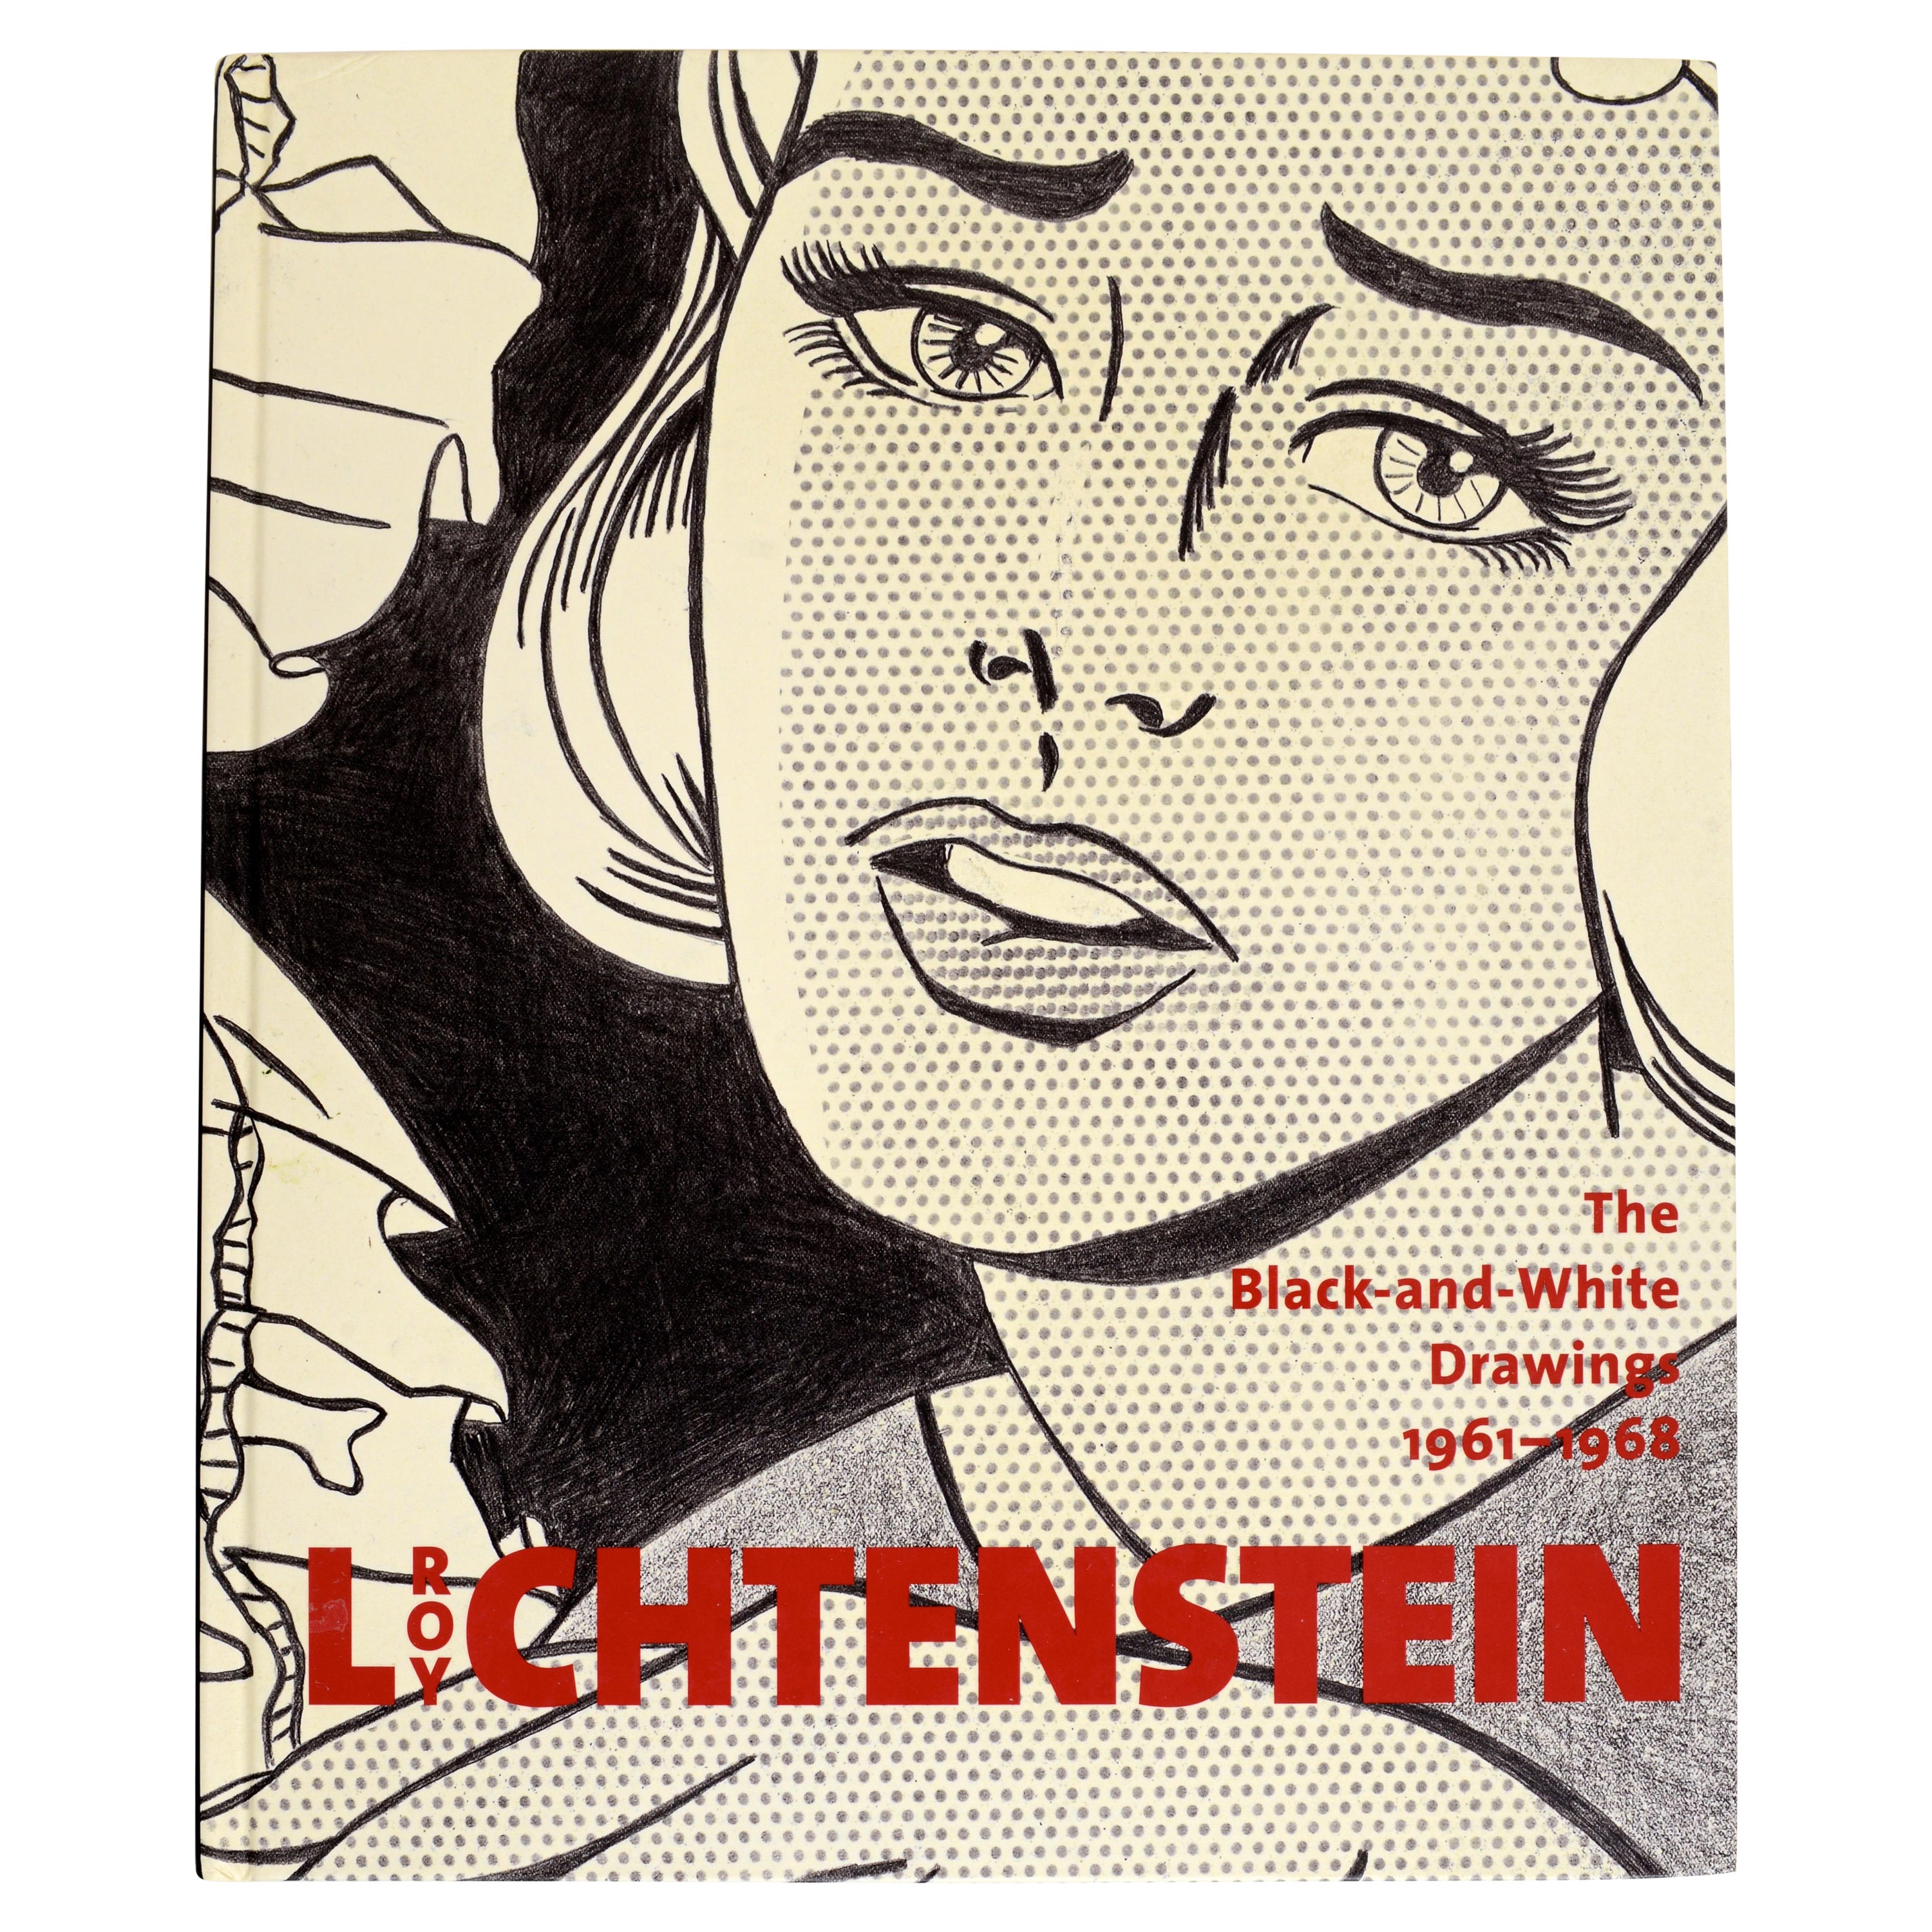 Roy Lichtenstein The Black-and-White Drawings, 1961-1968, 1st Ed Exhibition Cat